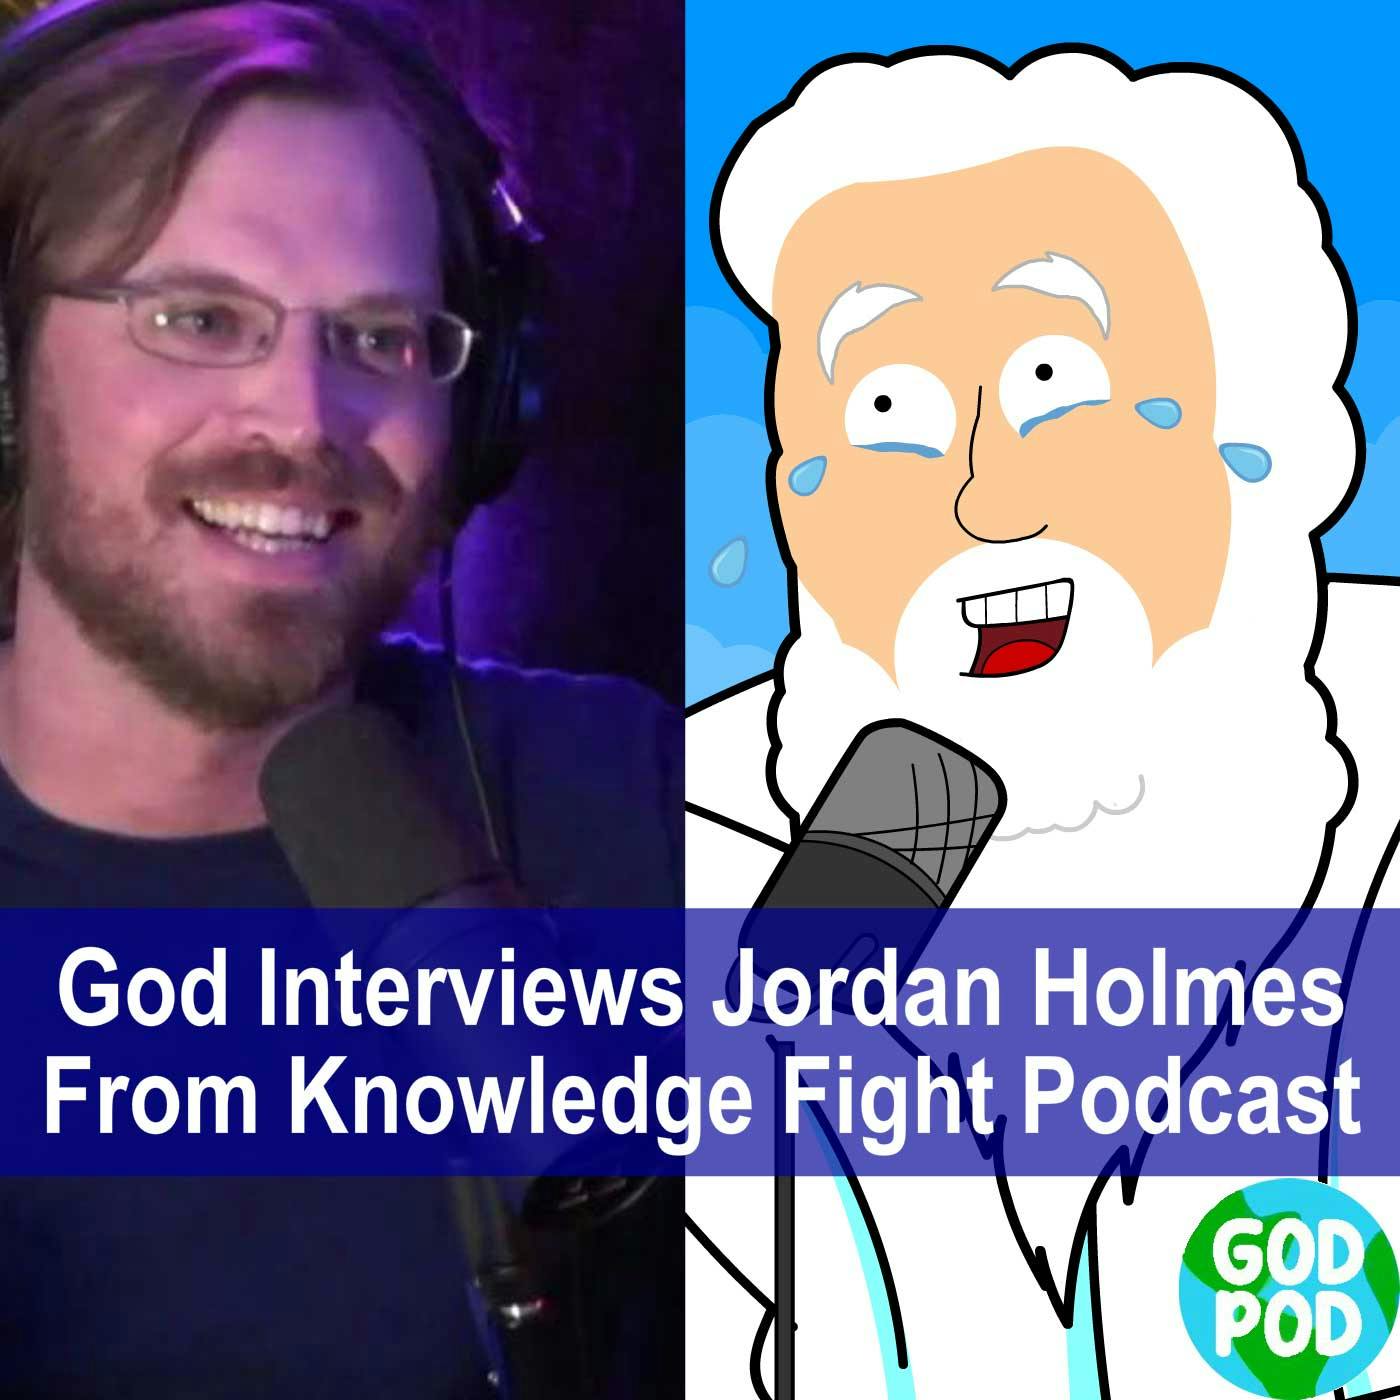 God Interviews Jordan Holmes From Knowledge Fight Podcast